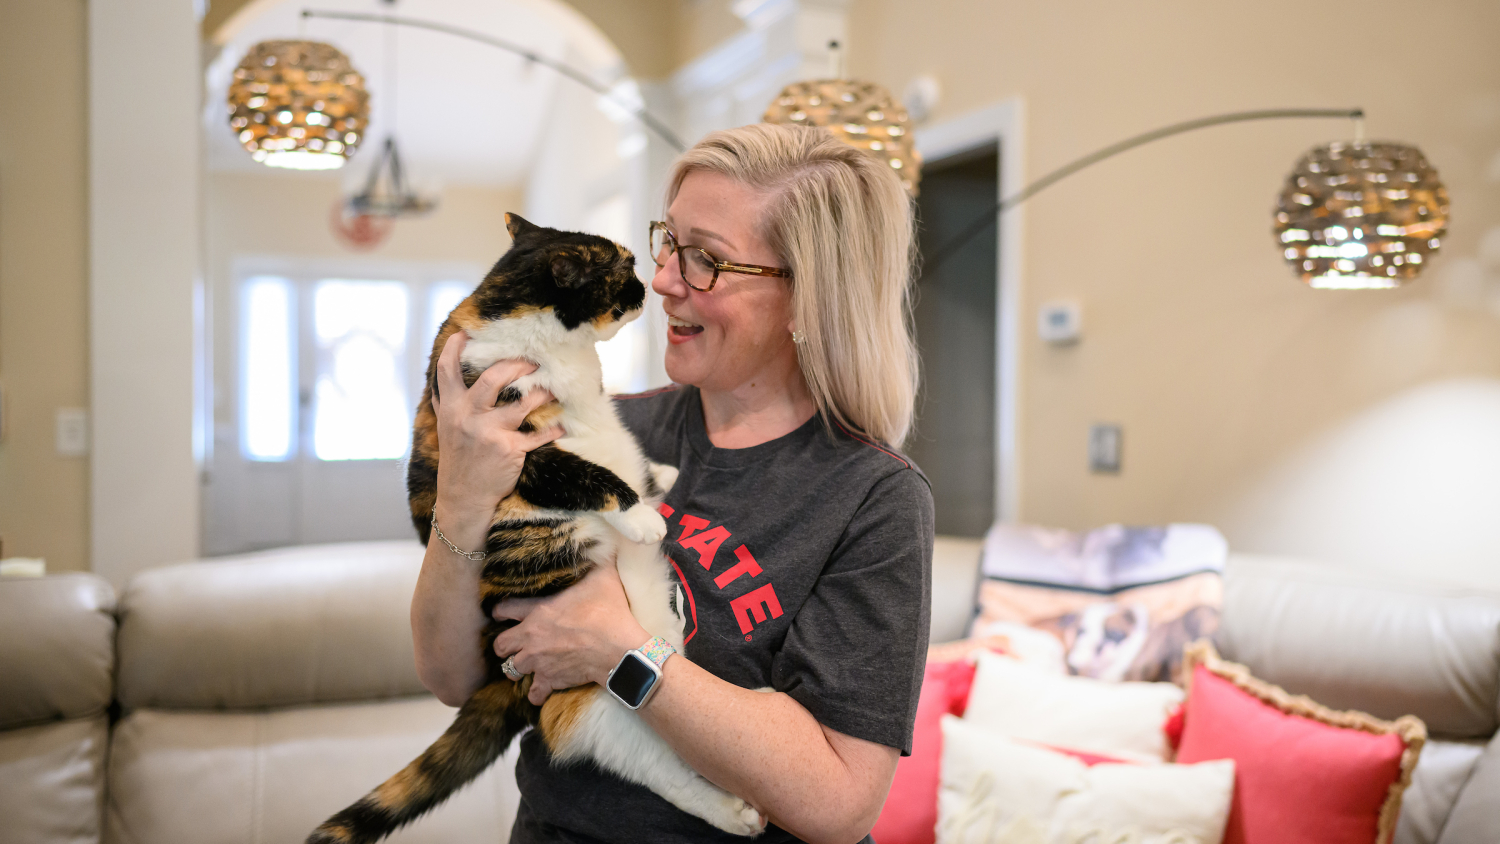 A woman with blonde, shoulder-length hair wearing a gray NC State t-shirt smiles at the calico cat she is holding in her living room.